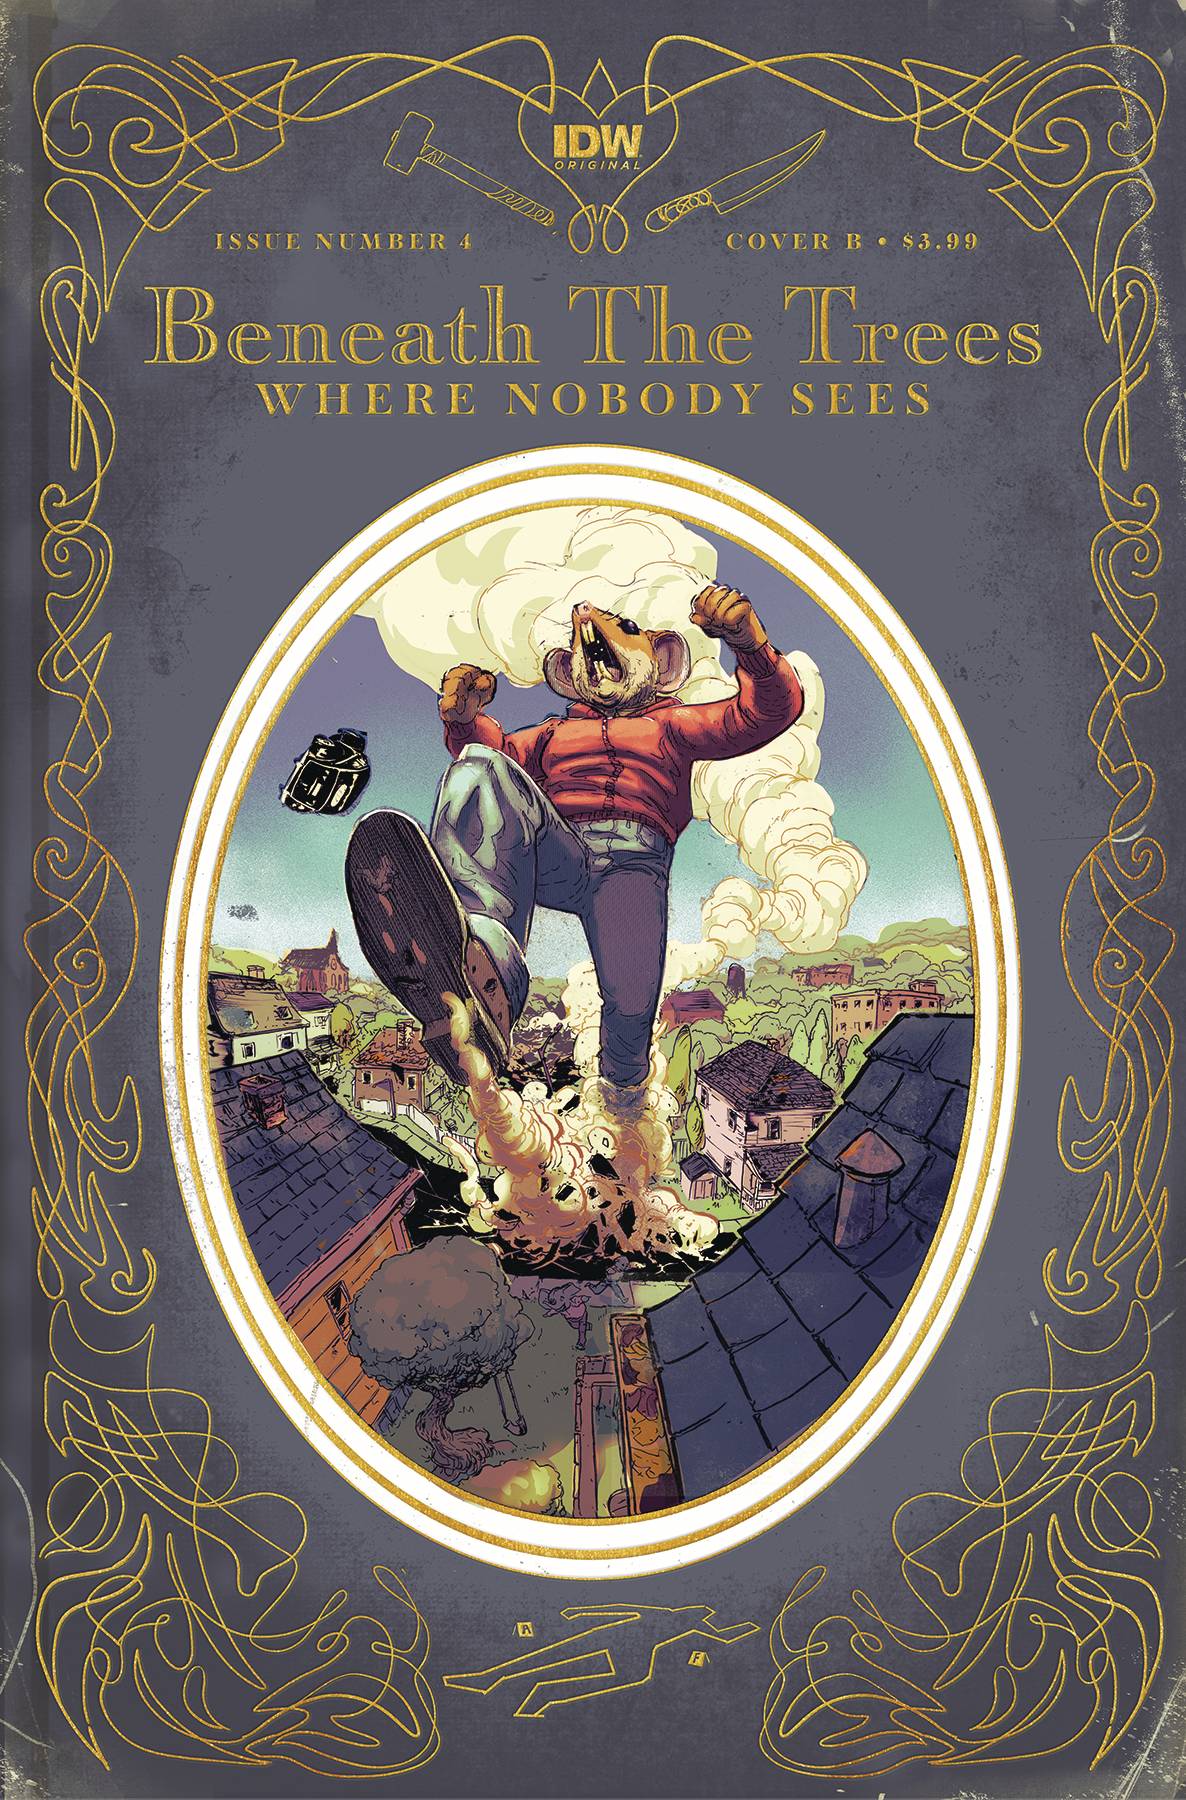 BENEATH TREES WHERE NOBODY SEES #4 COVER B